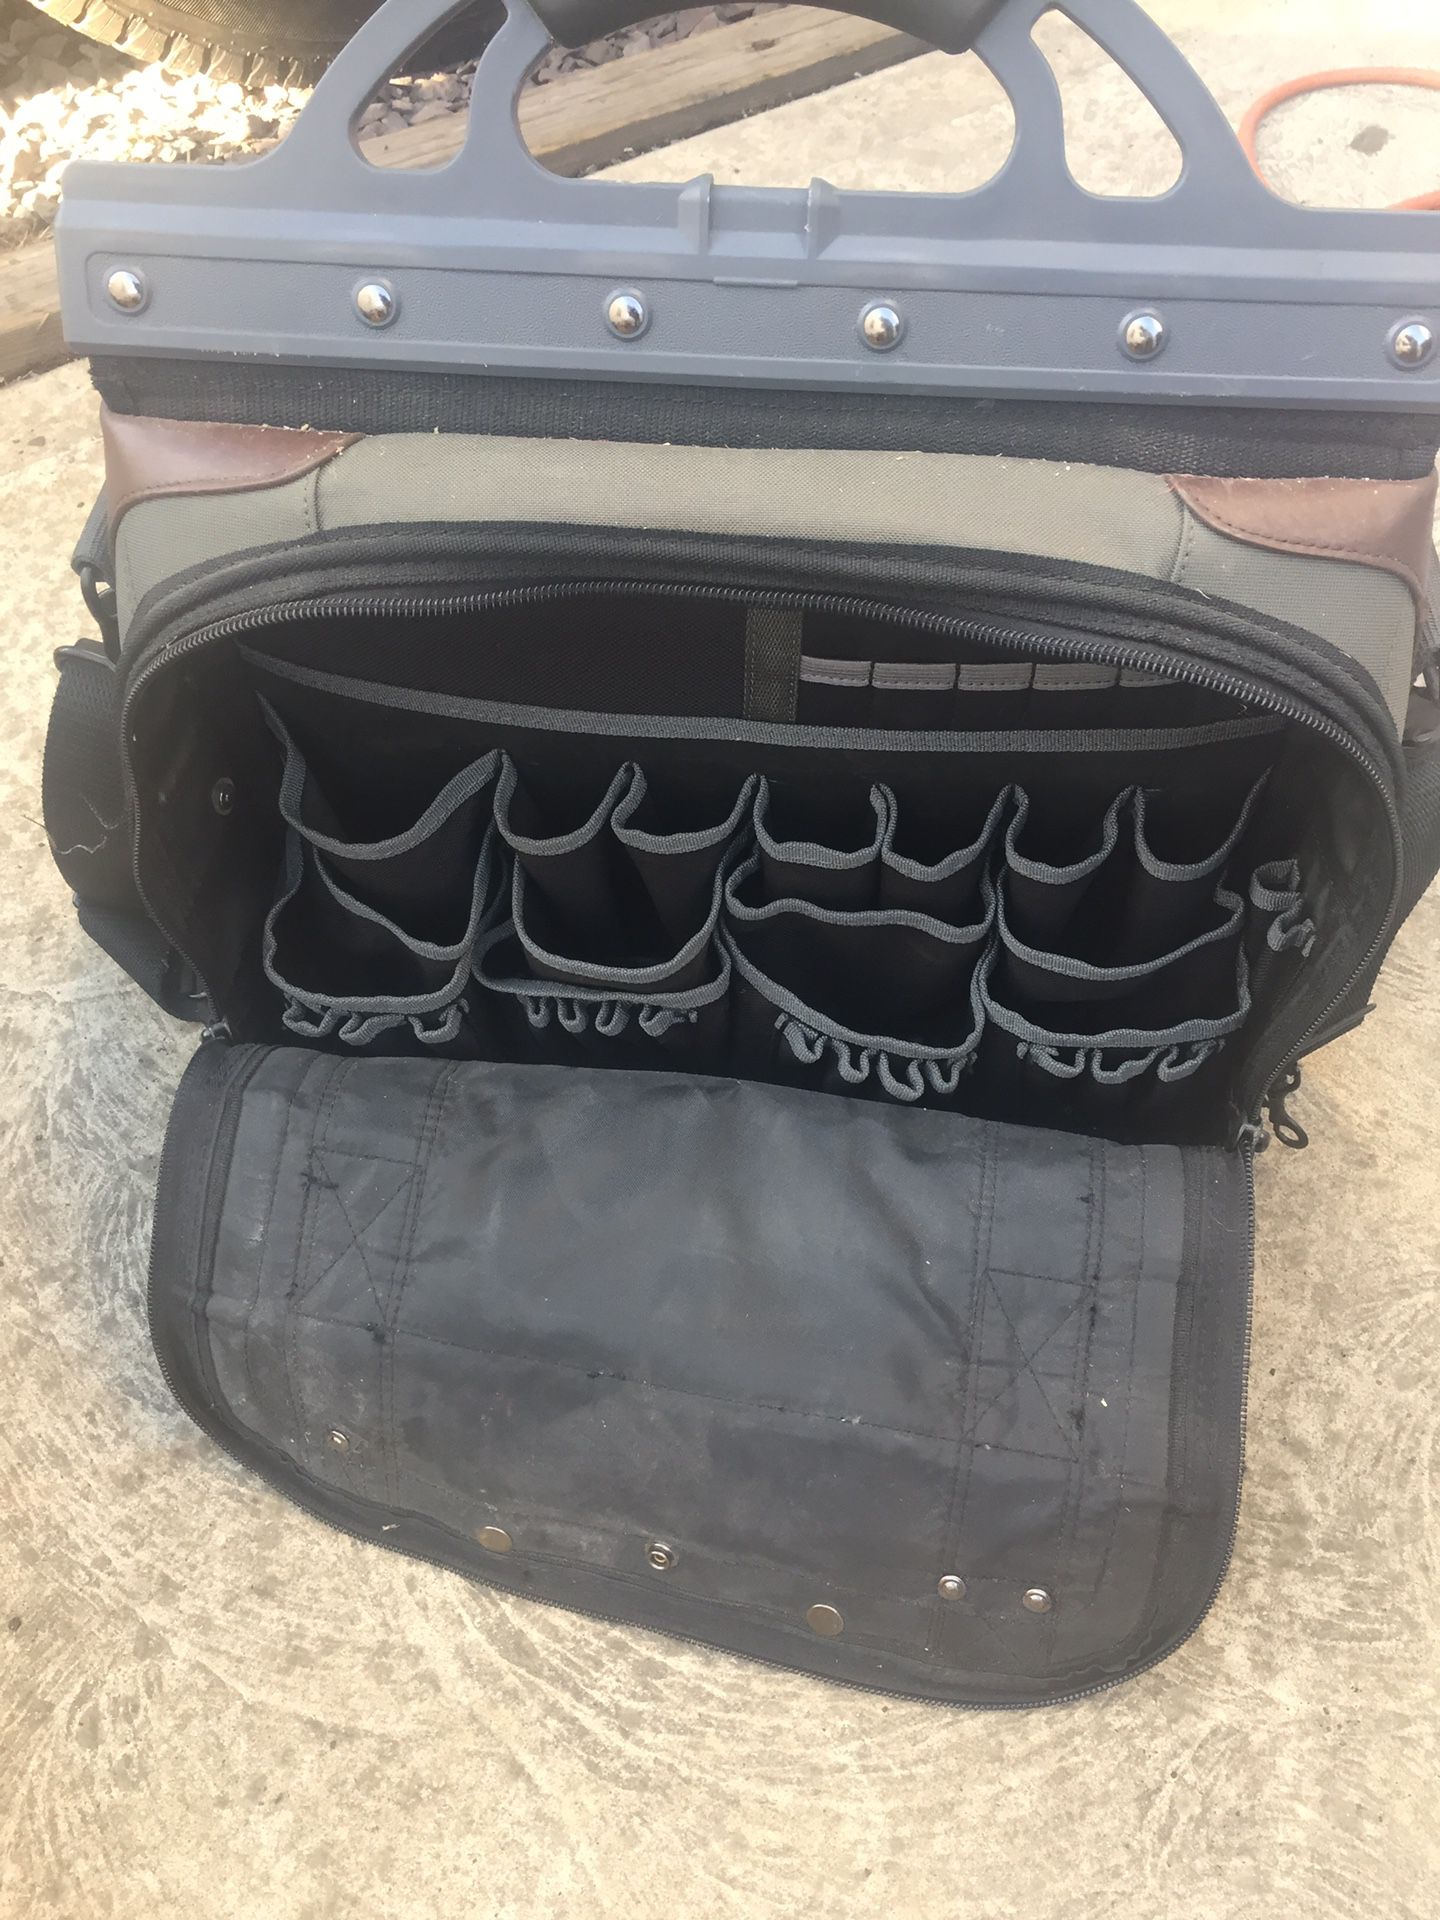 Veto Pro PAC Tech LC for Sale in Taylor, PA - OfferUp